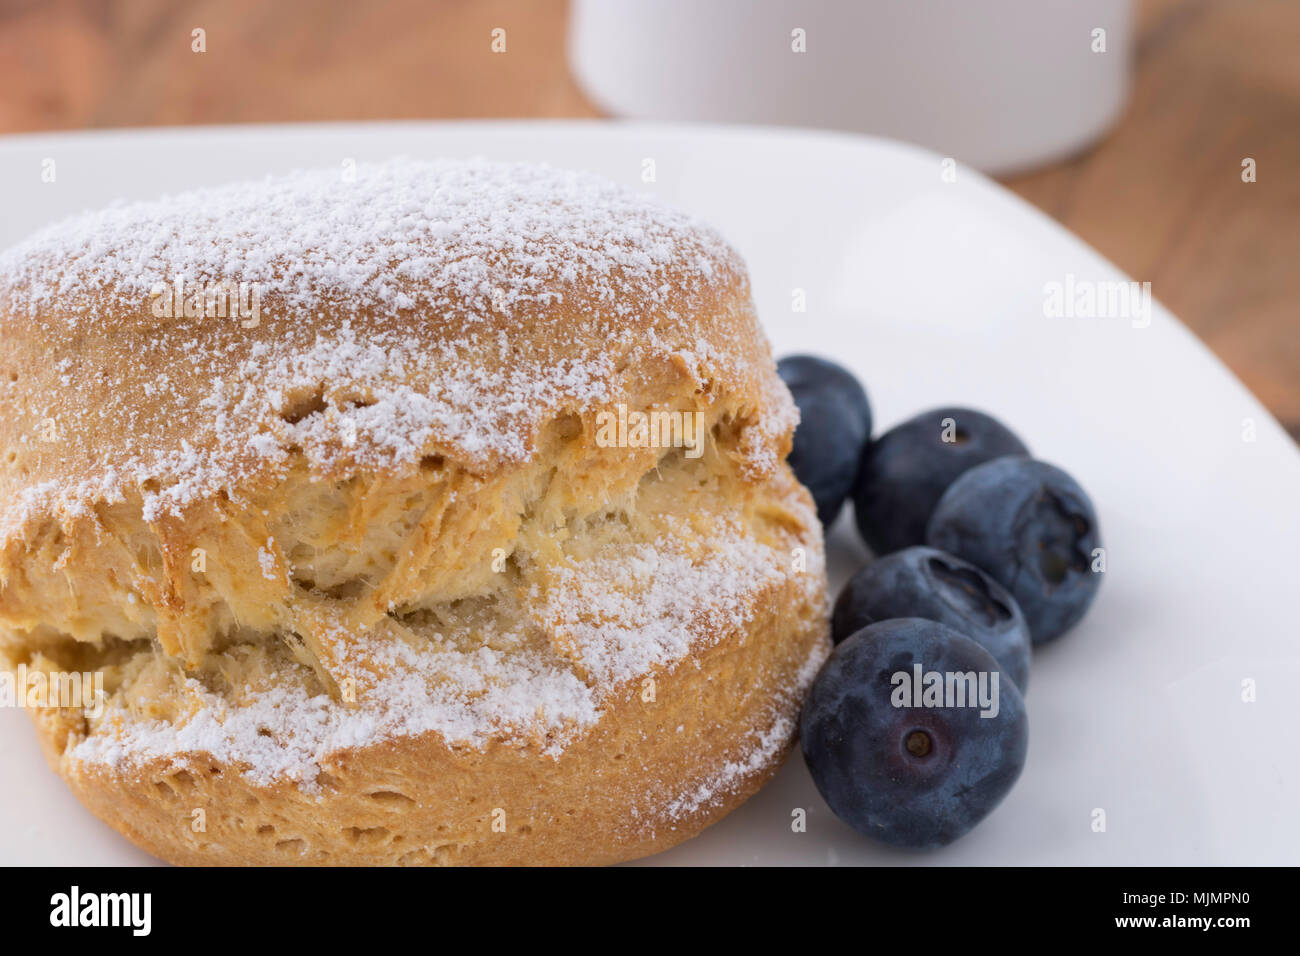 Traditional British Scone on a White Plate, five blueberries on right side, British Tea Time Stock Photo